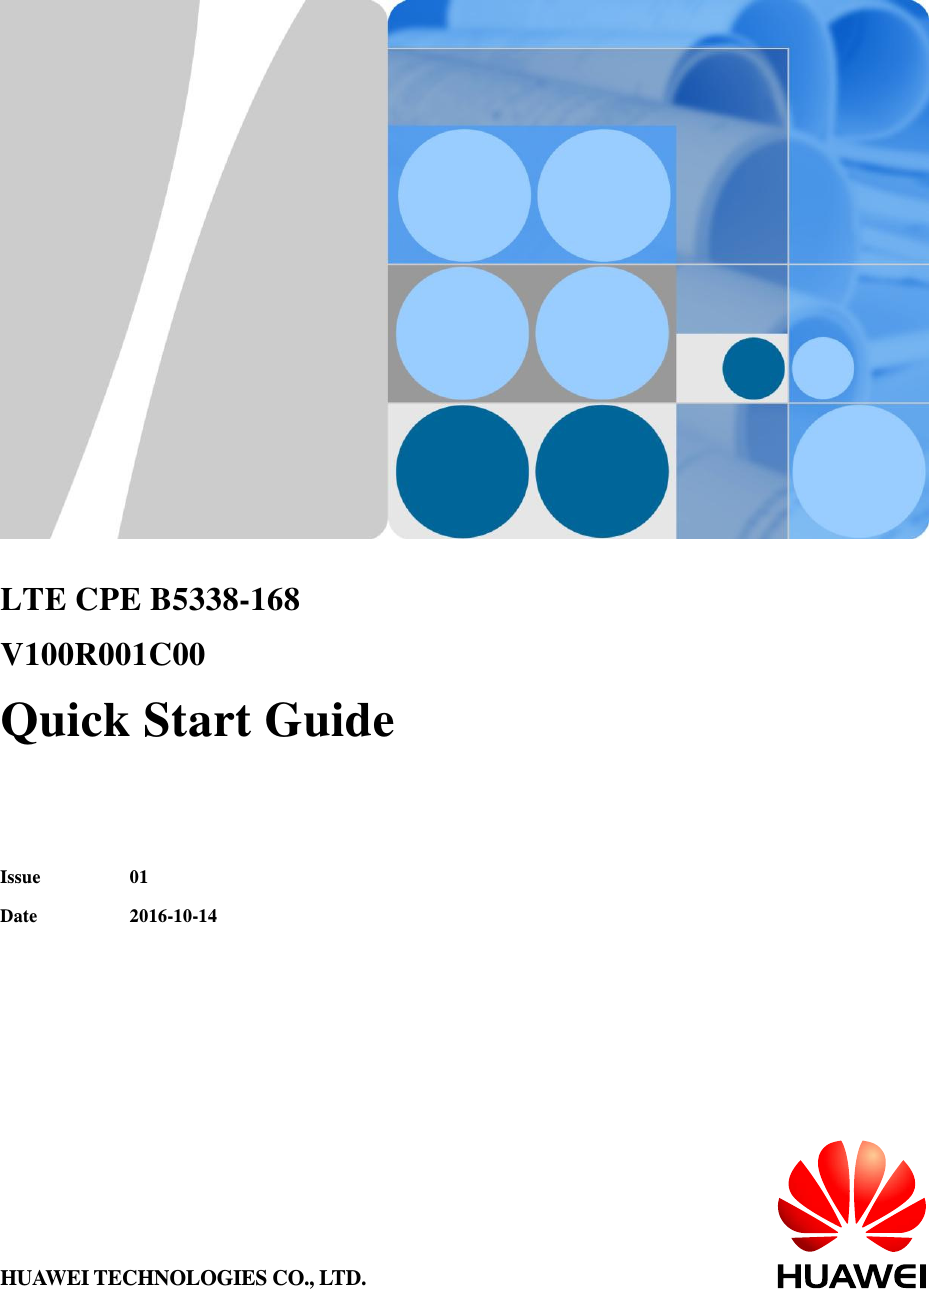         LTE CPE B5338-168 V100R001C00 Quick Start Guide   Issue 01 Date 2016-10-14 HUAWEI TECHNOLOGIES CO., LTD. 